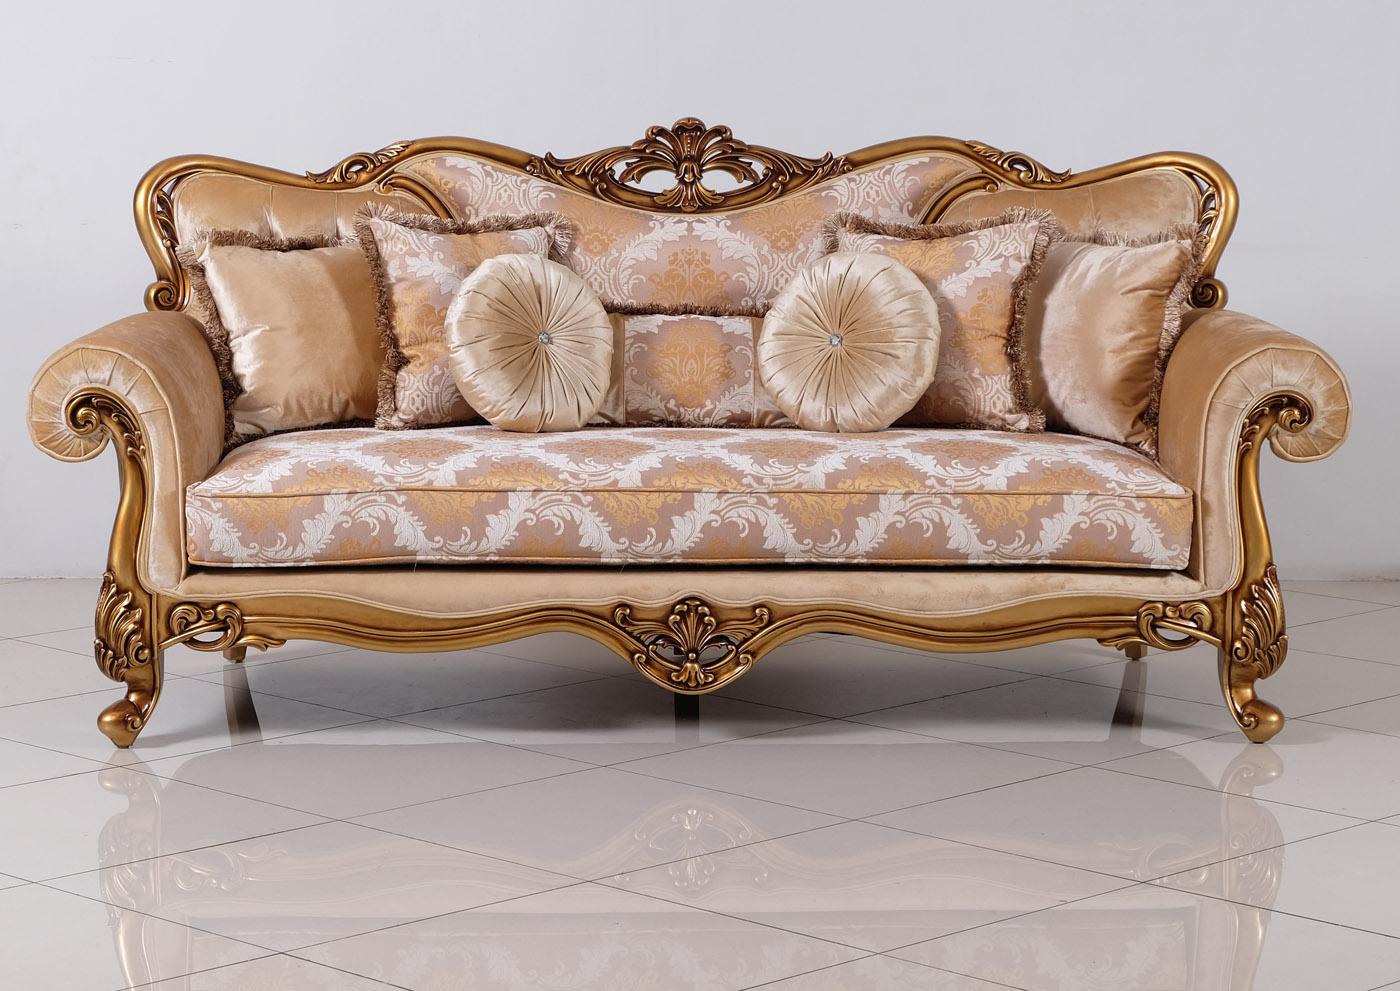 Classic, Traditional Sofa CLEOPATRA 4798-S in Gold, Bronze Fabric